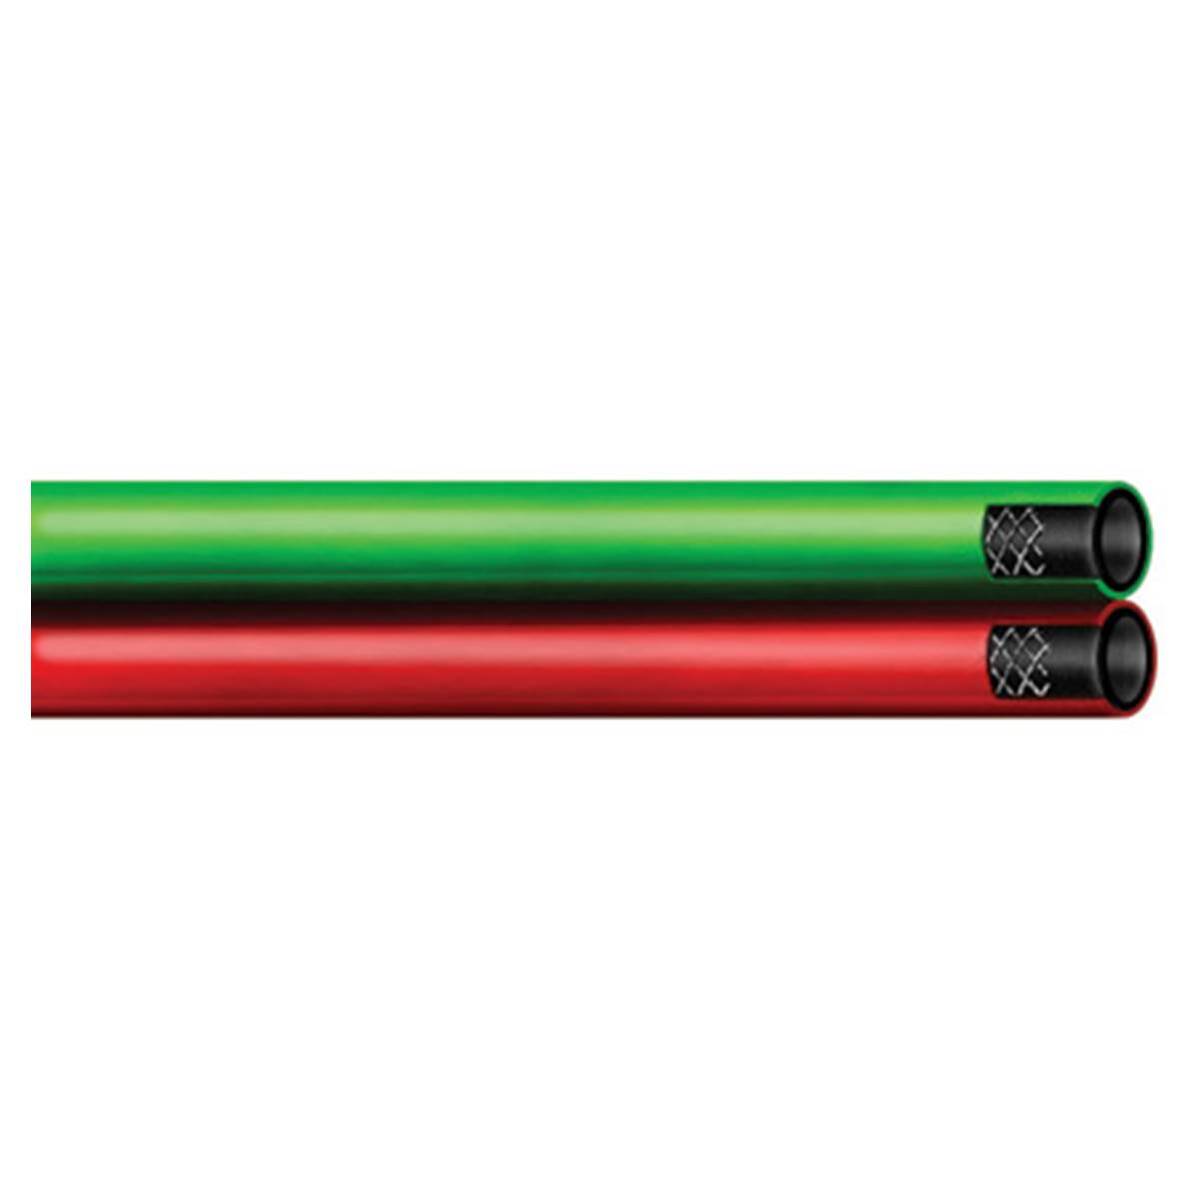 1 Unit RADNOR 1/4X 25 Red and Green SBR Synthetic Rubber Twin Hose with BB Hose Fittings 